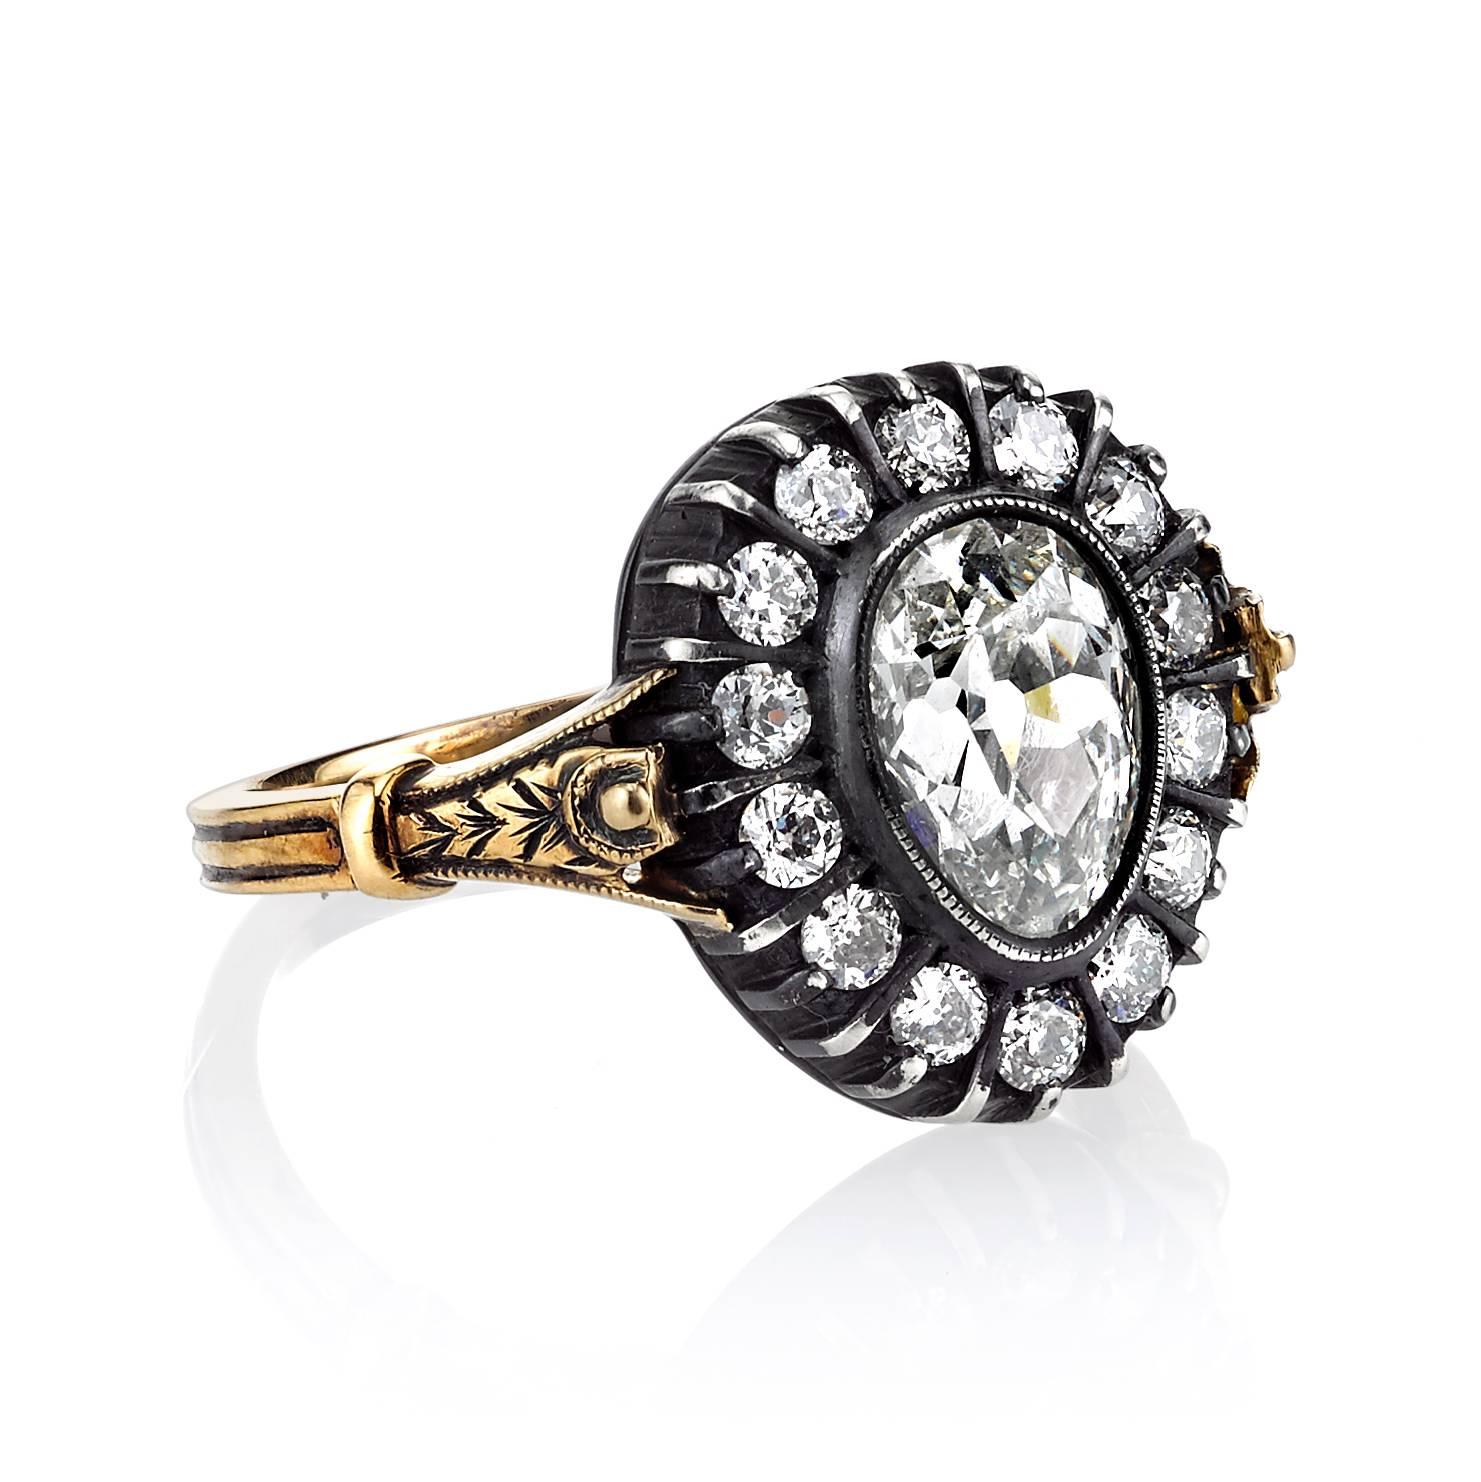 1.27ct G/SI1 EGL certified vintage Pear shape diamond set in a handcrafted 18K oxidized yellow gold and silver mounting. A classic Victorian design featuring a bezel set diamond, two toned metal, and nature inspired motifs on the shank.